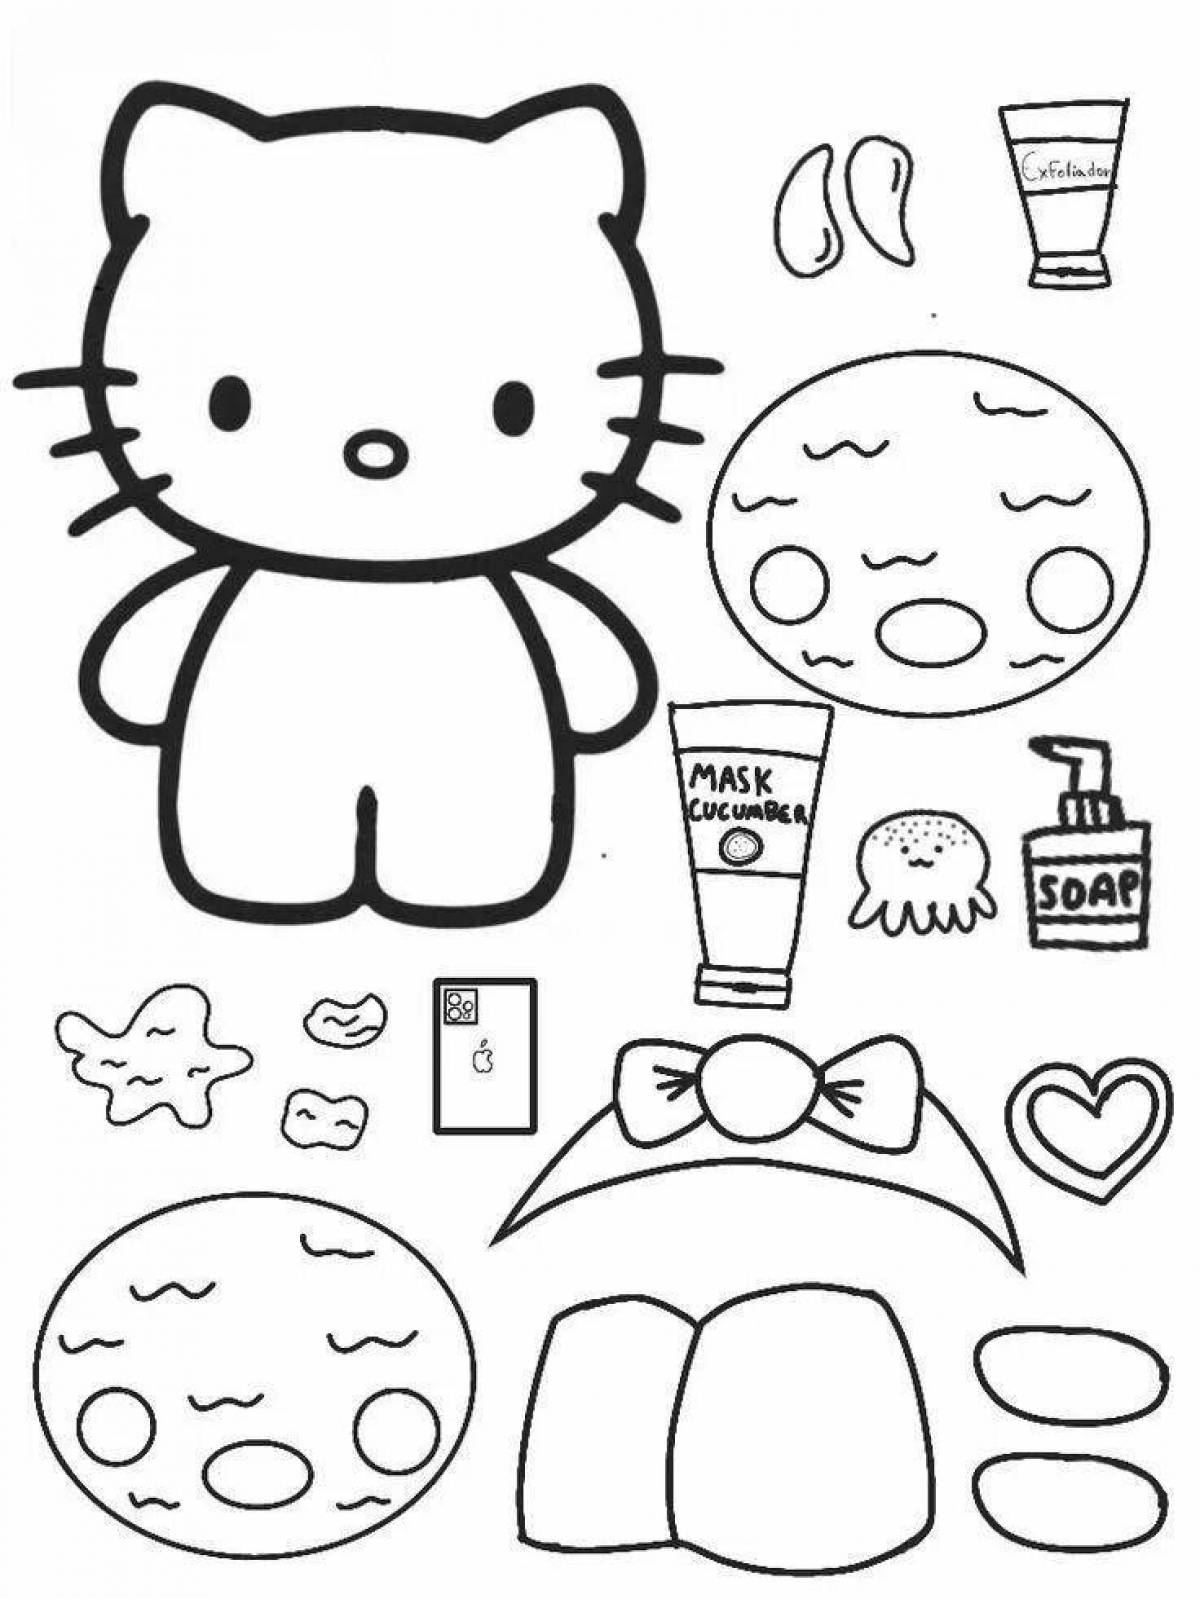 Wonderful coloring hello kitty without clothes